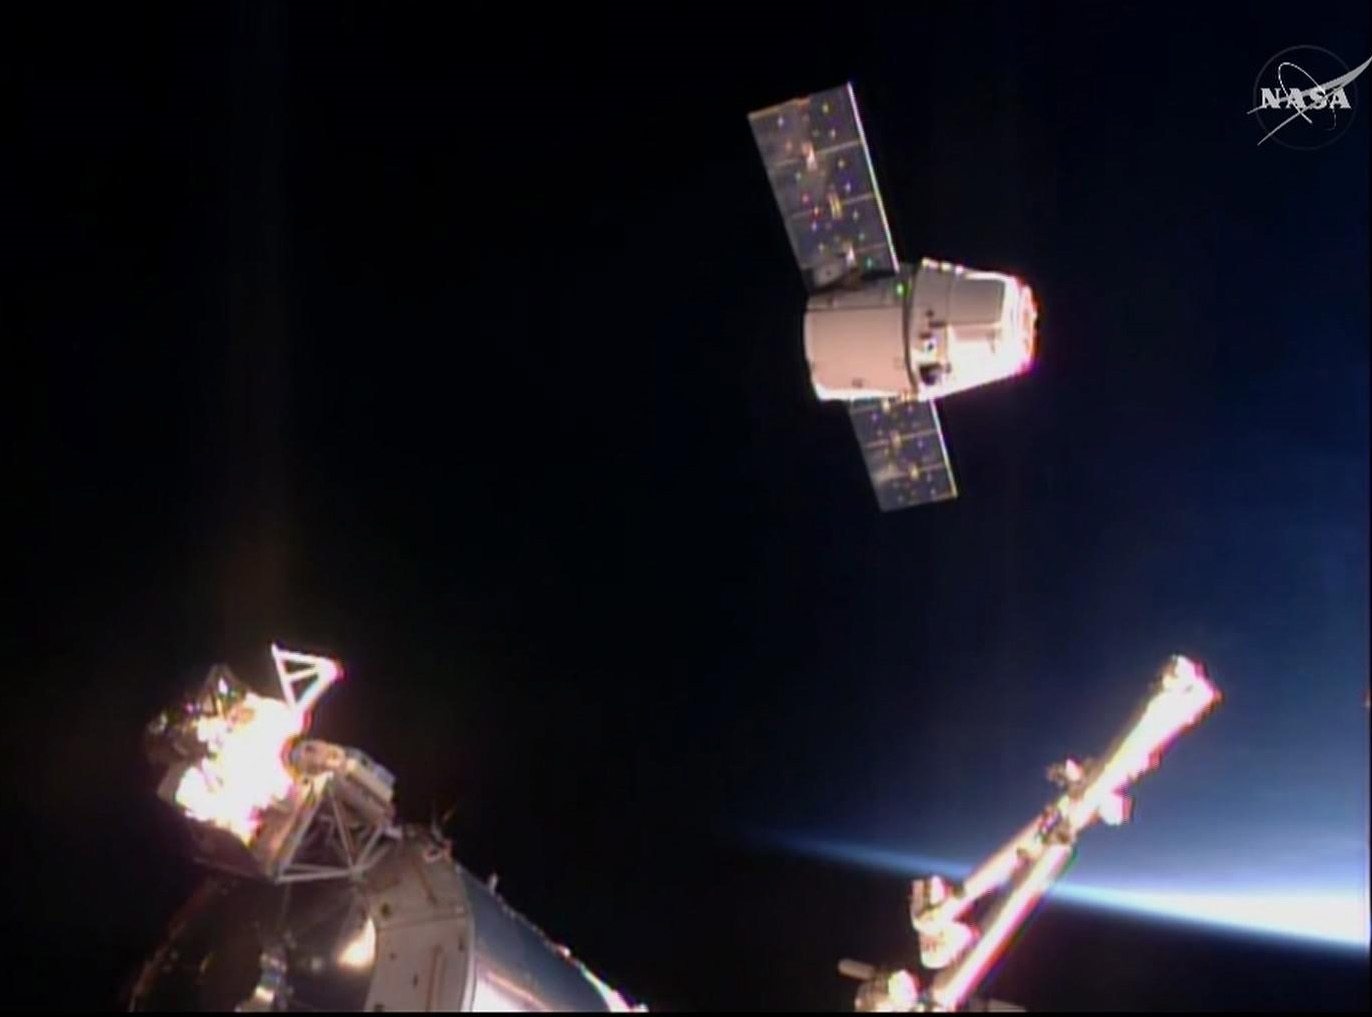 In this frame taken from video from NASA TV, the SpaceX Dragon cargo ship approaches the International Space Station, Sunday April 10, 2016. A SpaceX Dragon cargo ship arrived at the International Space Station on Sunday, two days after launching from Cape Canaveral, Florida. Station astronauts used a big robot arm to capture the Dragon, orbiting 260 miles above Earth.